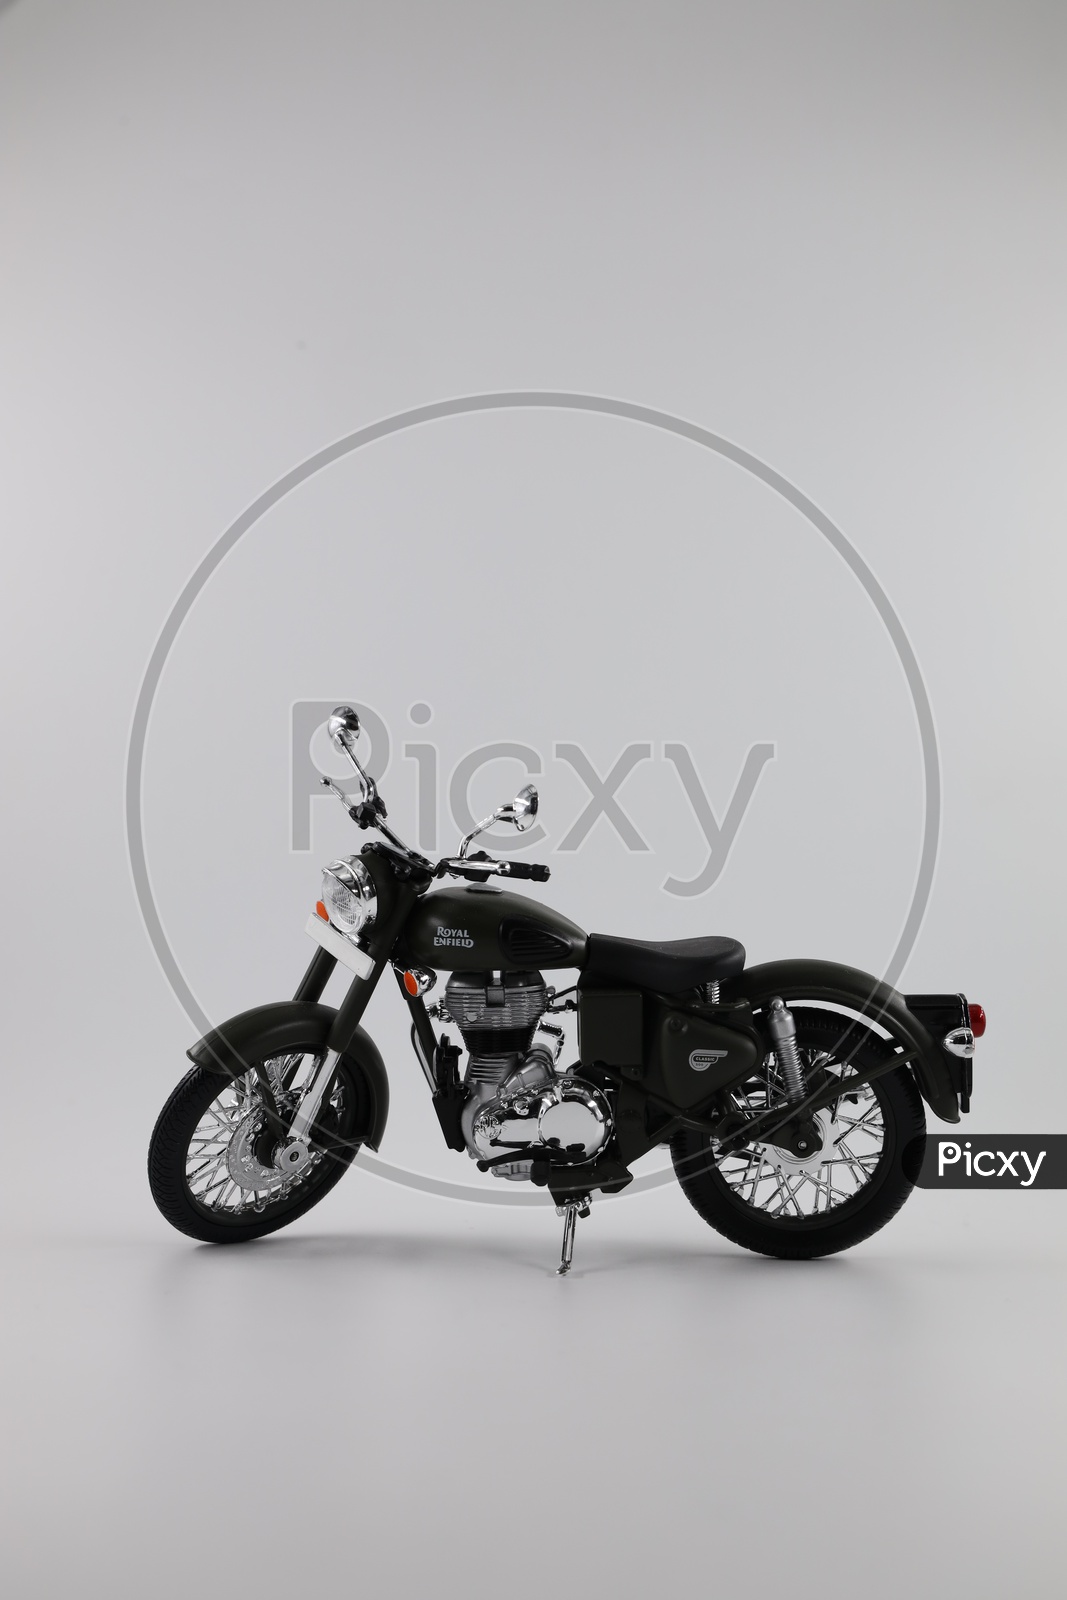 Royal Enfield Bullet Classic 350 Bike Miniature On an Isolated White  Background